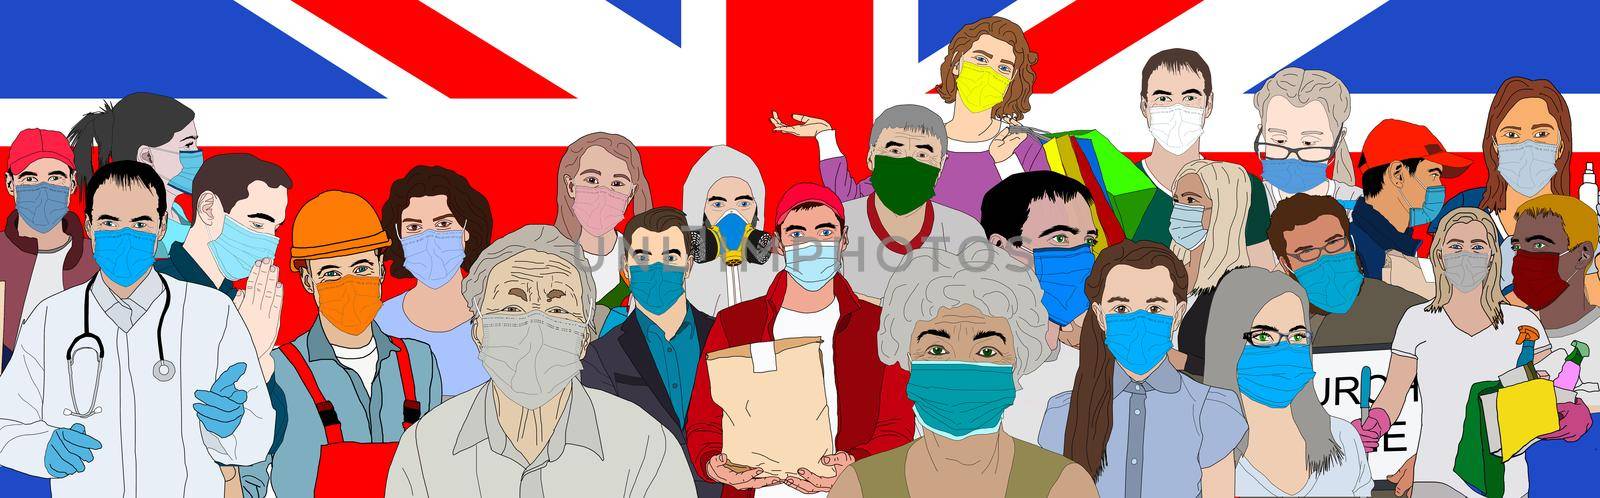 people on the background of the flag of great britain by Andelov13